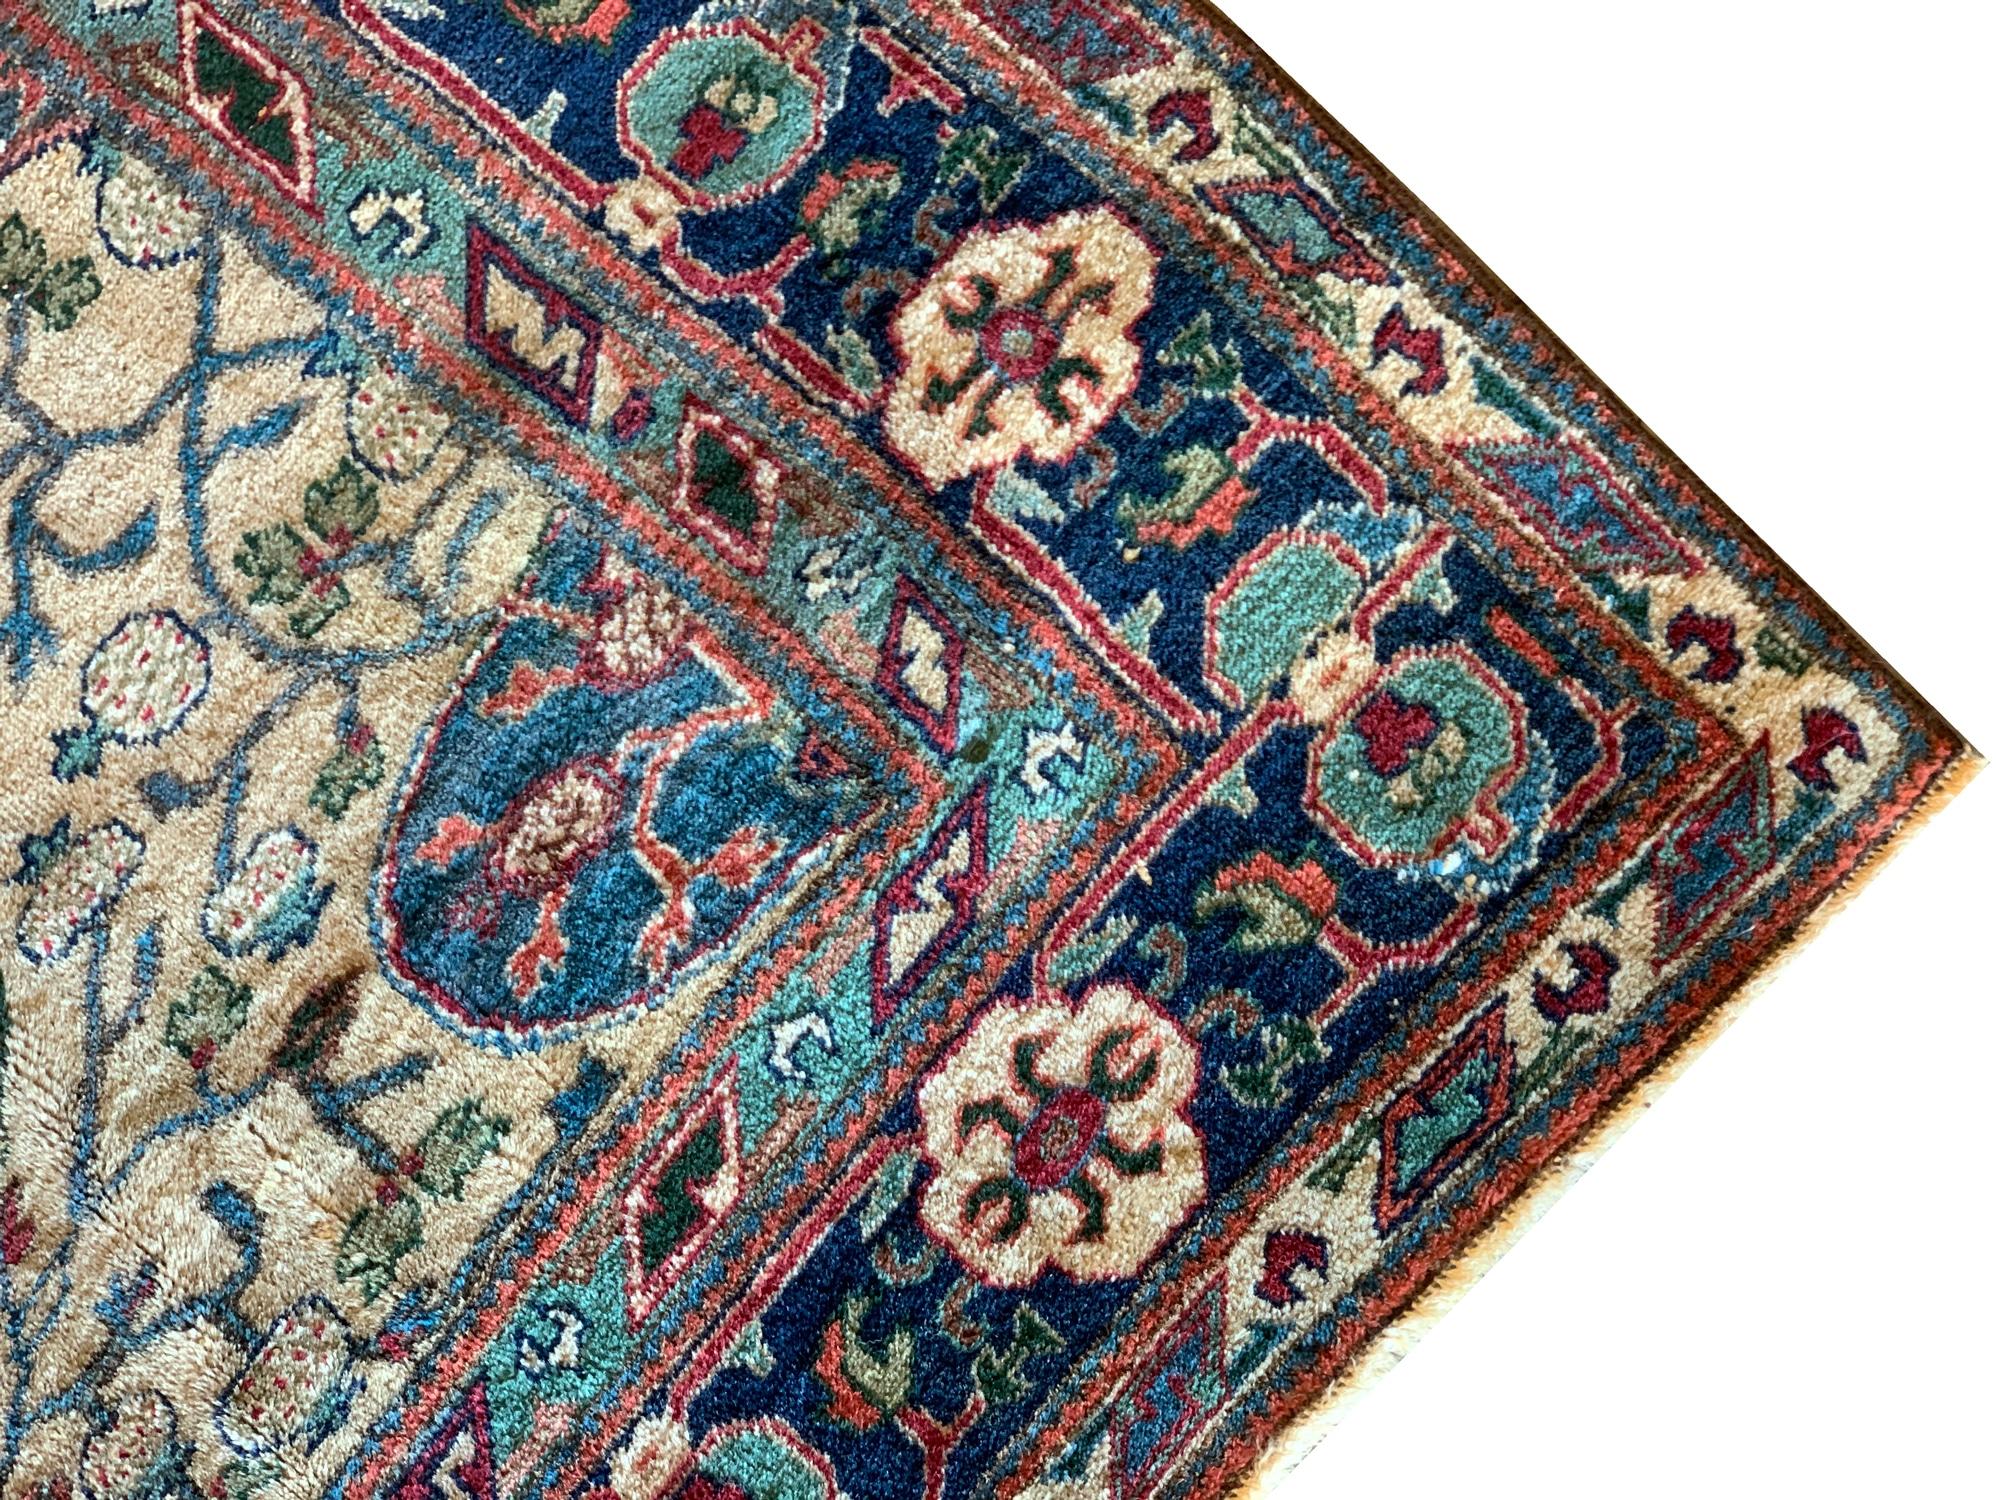 Antique Collectible Khotan Rug, Turkestan Central Asia 1880s In Excellent Condition For Sale In Hampshire, GB